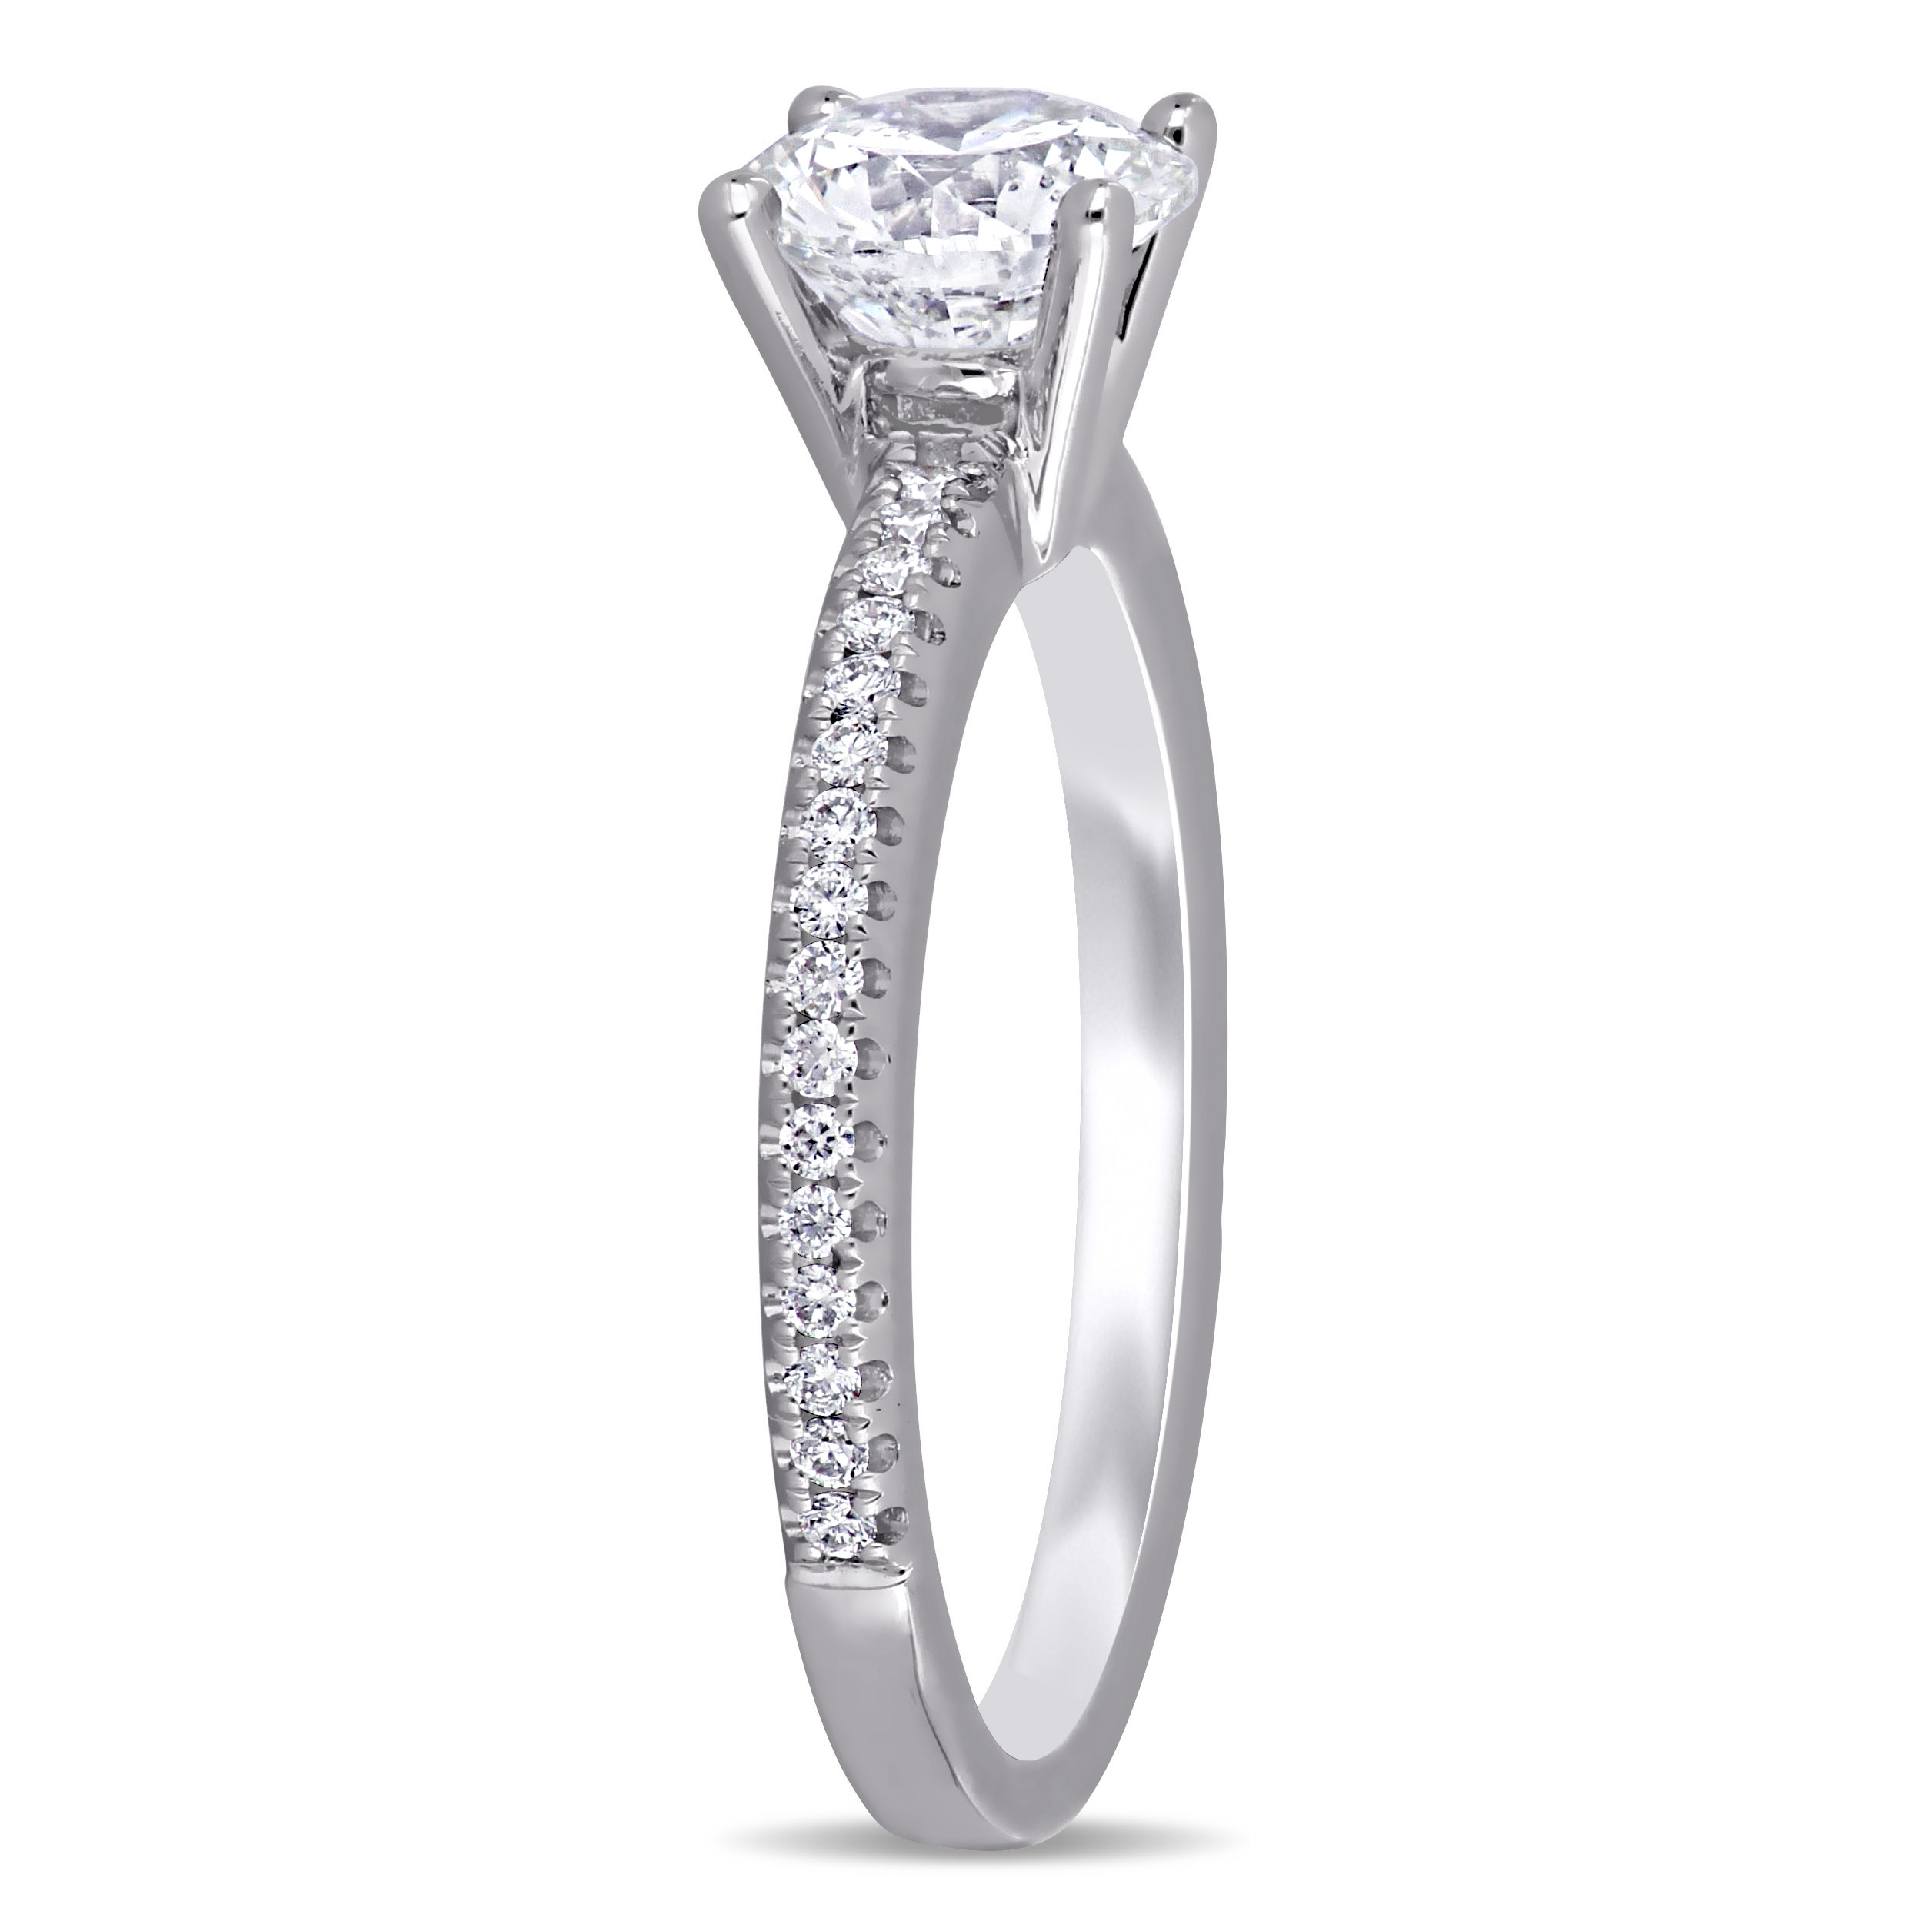 1 1/6 CT TW Diamond Engagement Ring in 14k White Gold